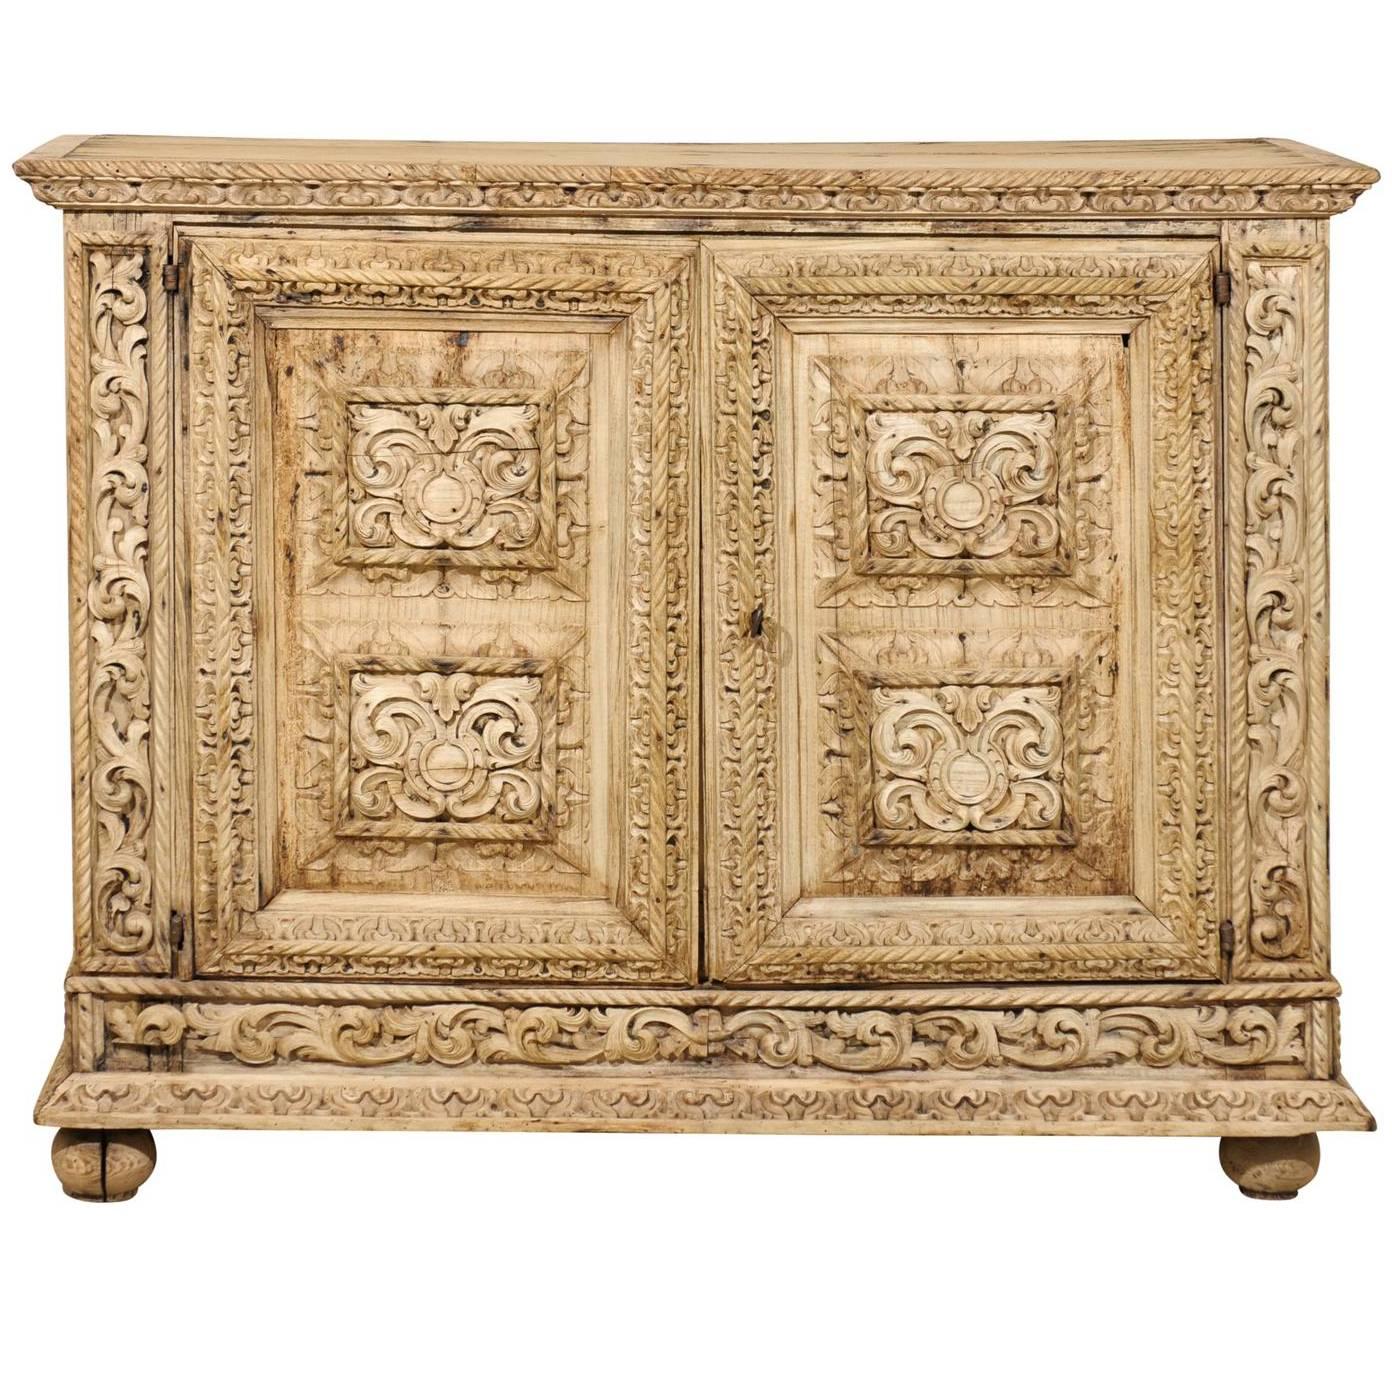 An Italian 18th Century Two-Door Bleached Wood Credenza Richly Carved with Age